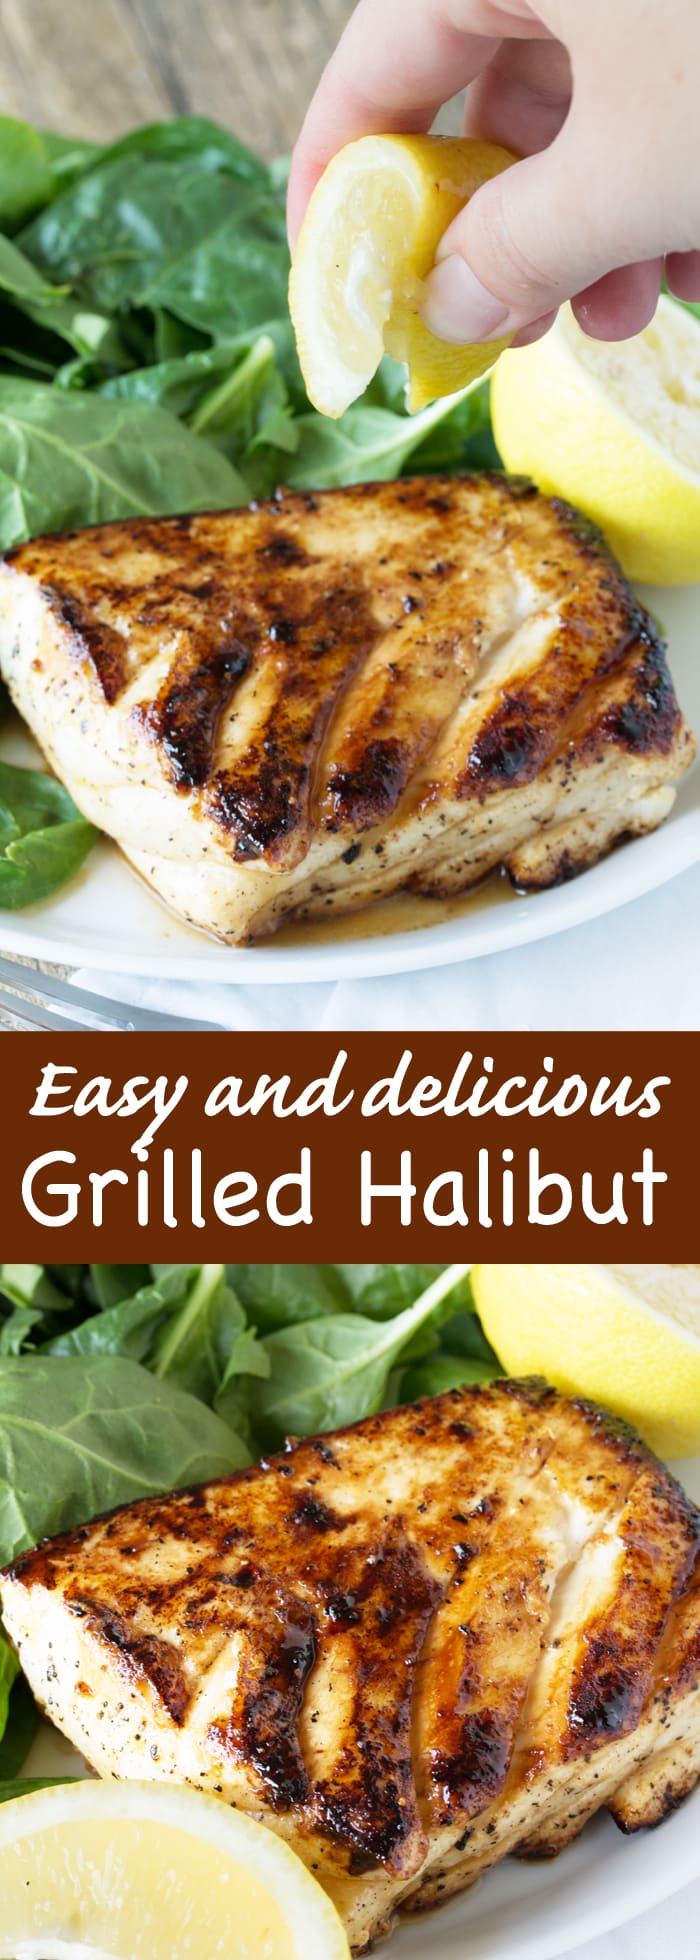  Easy and delicious grilled halibut recipe with honey and lemon will have you falling in l Grilled Halibut